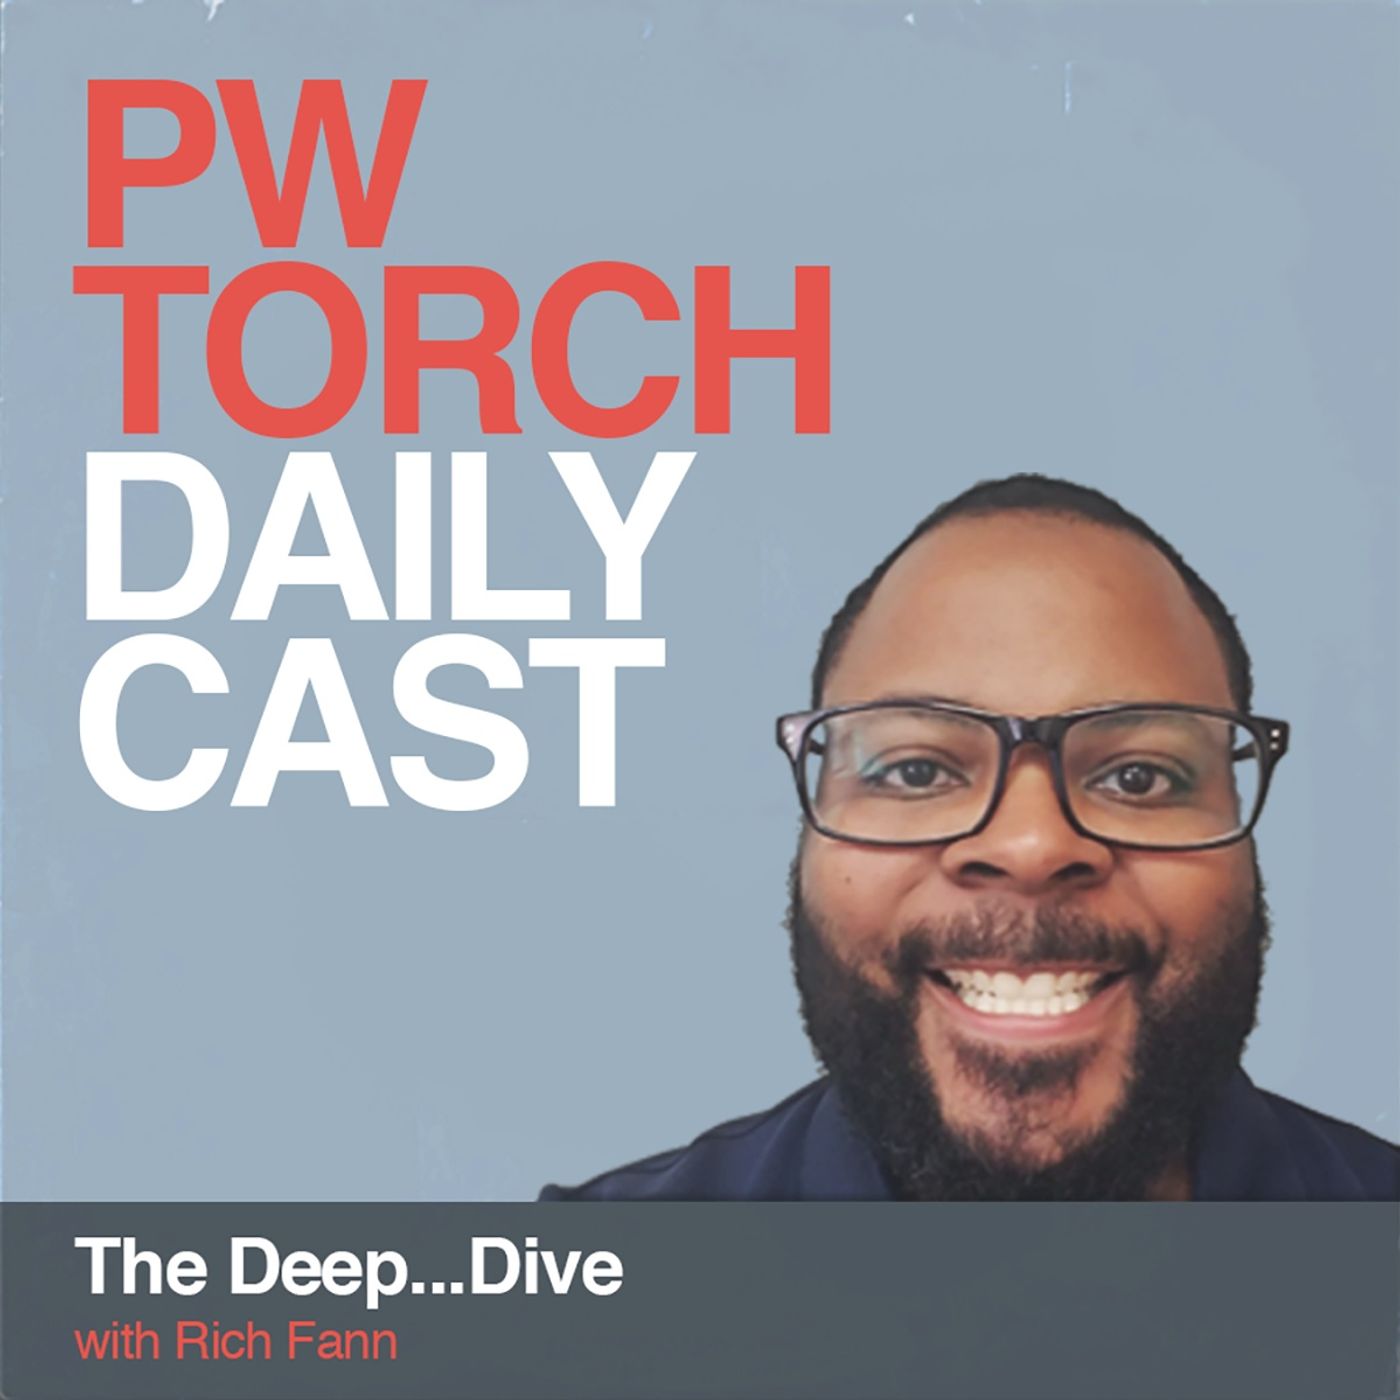 PWTorch Dailycast - The Deep...Dive - The Will Cooling Solo Lightning Round